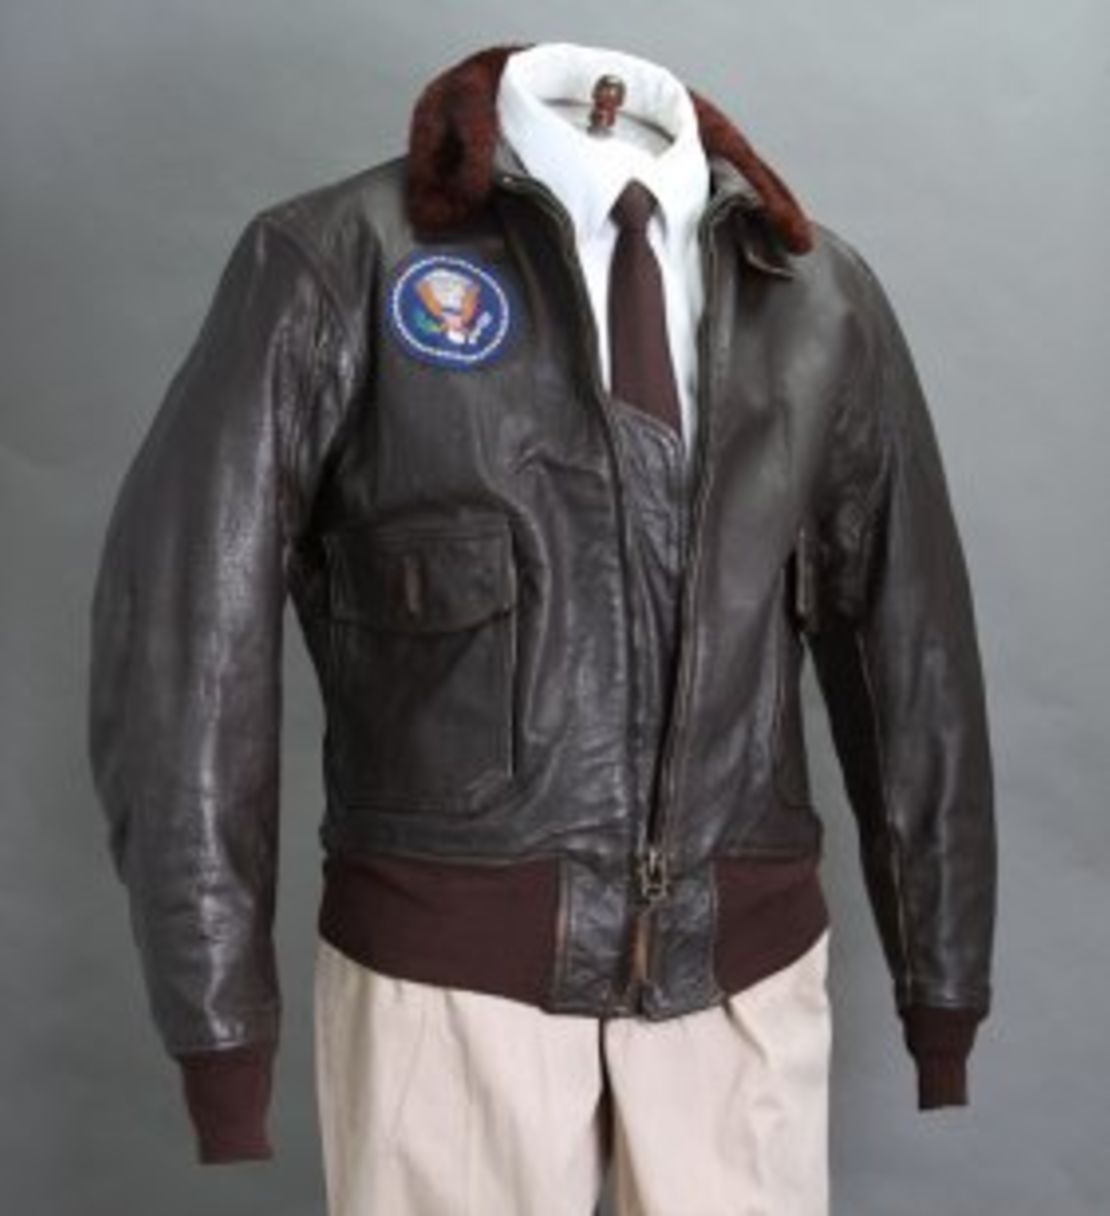 The brown leather jacket, affixed with a patch of the presidential seal, far exceeded the pre-auction estimate.